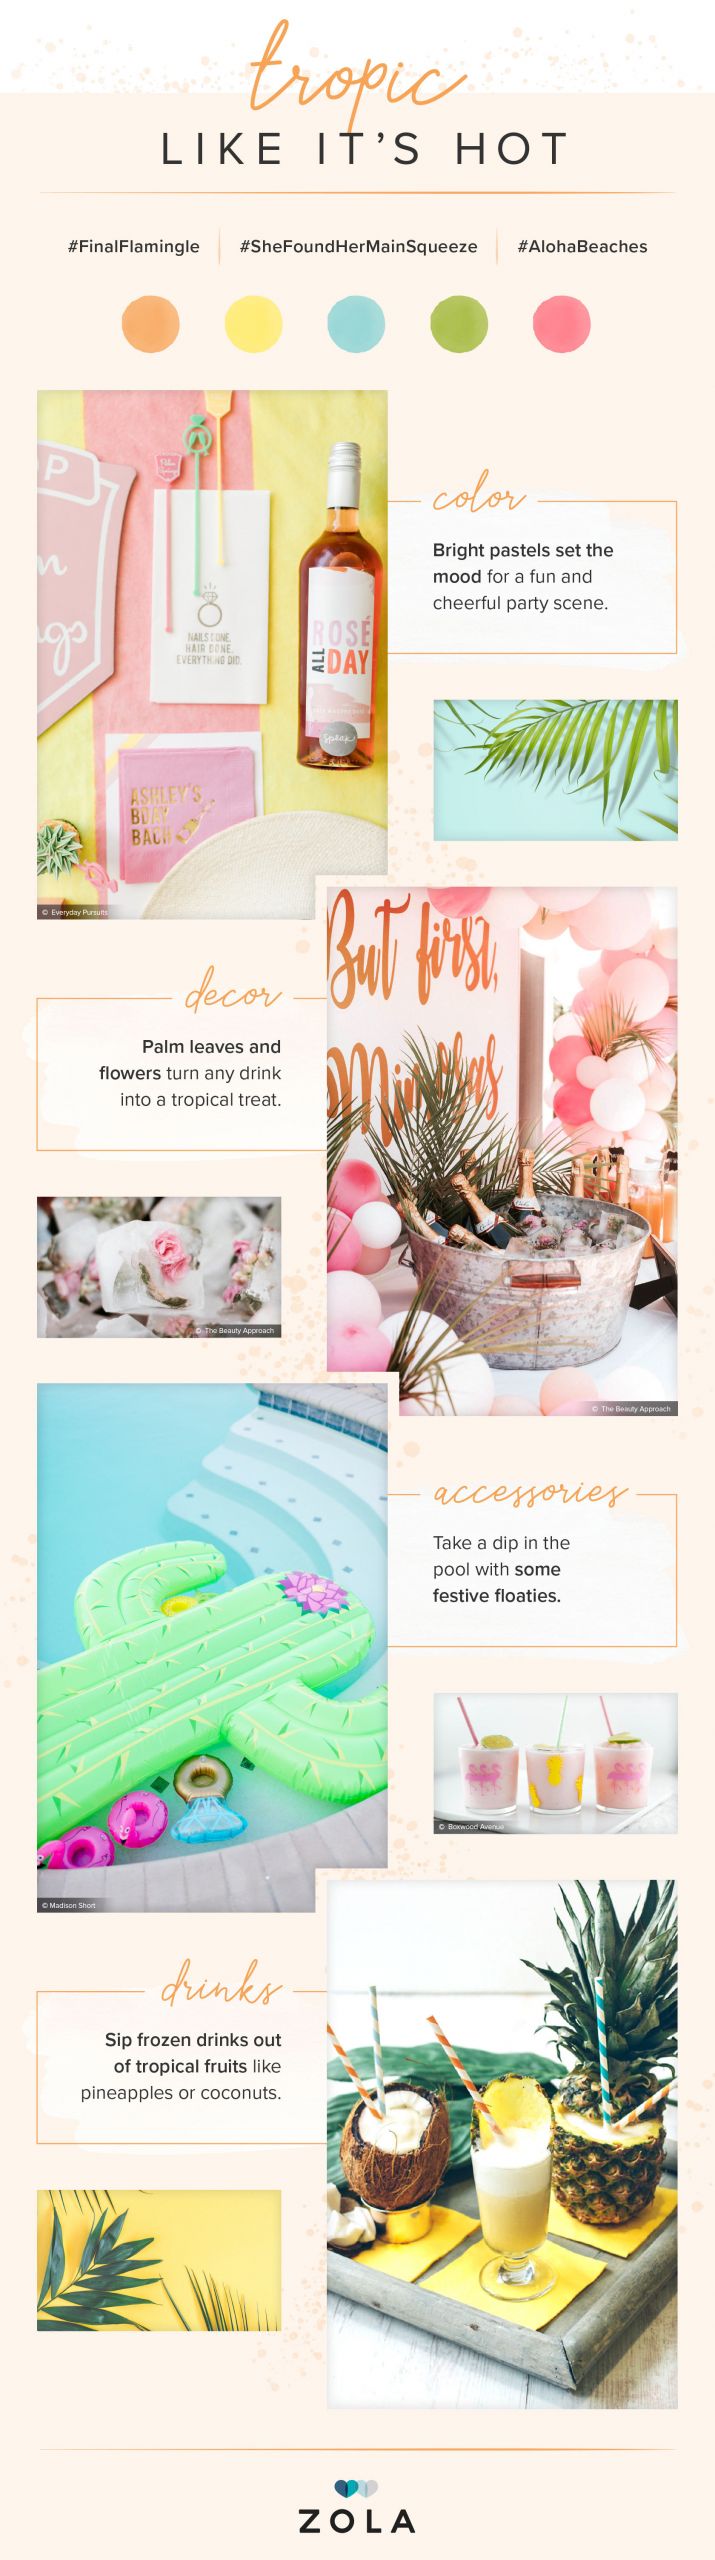 Ideas For A Bachelorette Party In Delray Beach Florida
 57 Bachelorette Party Themes for the Perfect Bash